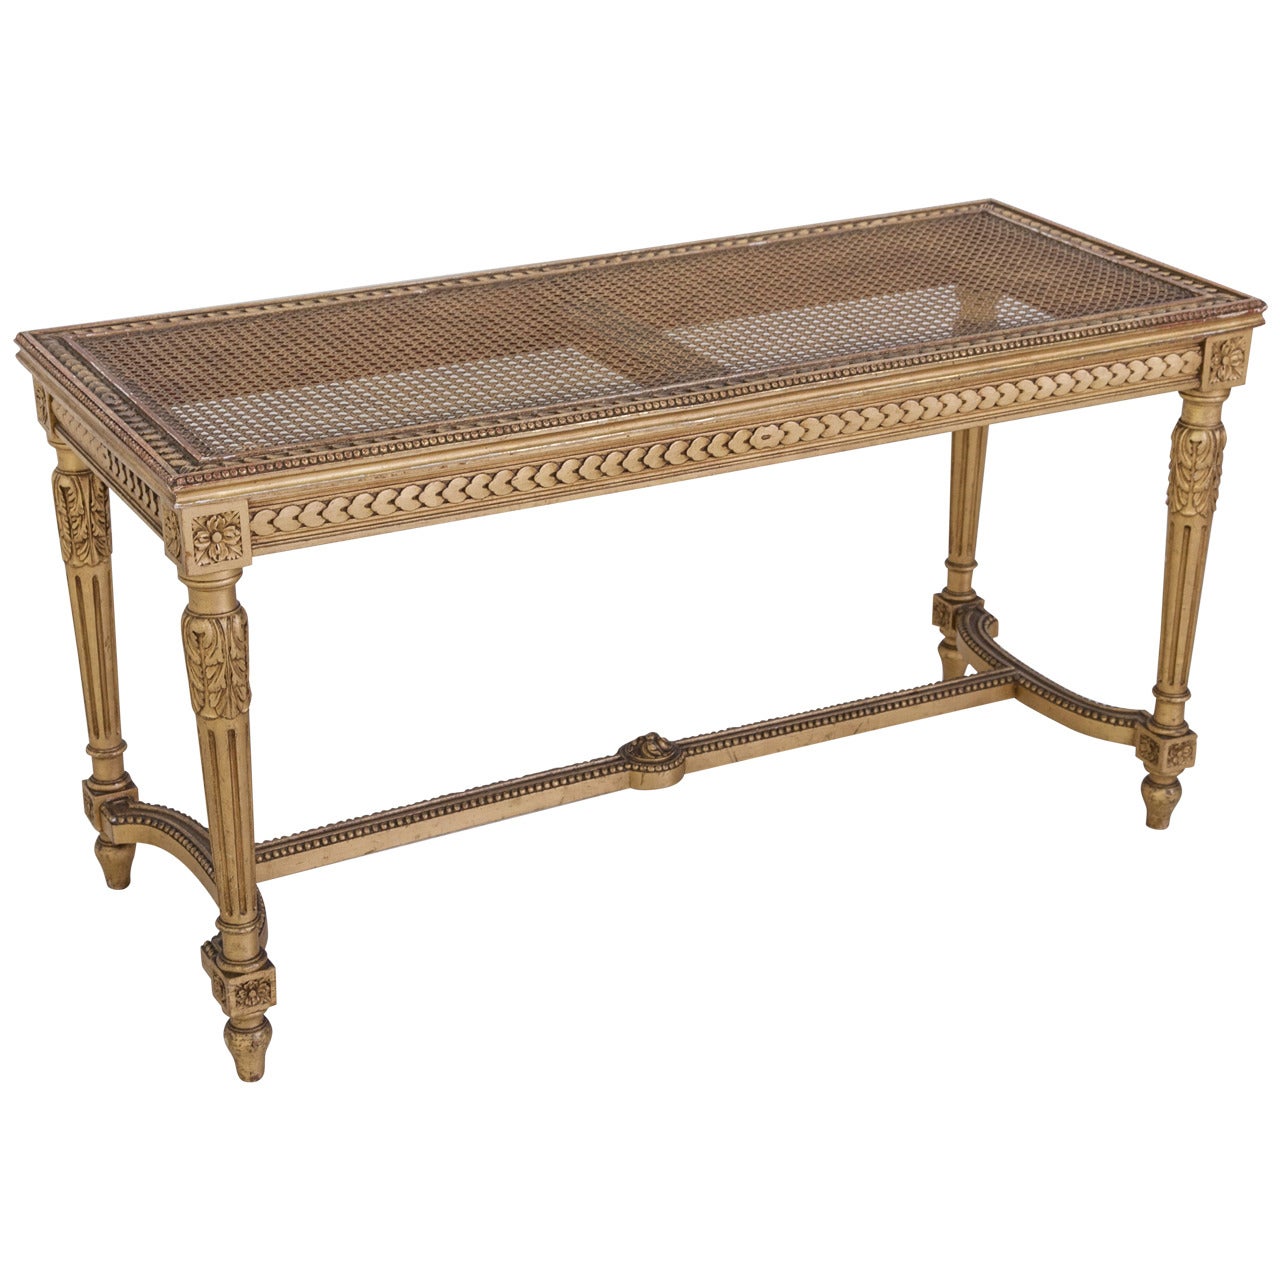 French Gold Leaf Louis XVI Style Bench Banquette Piano Bench circa 1920